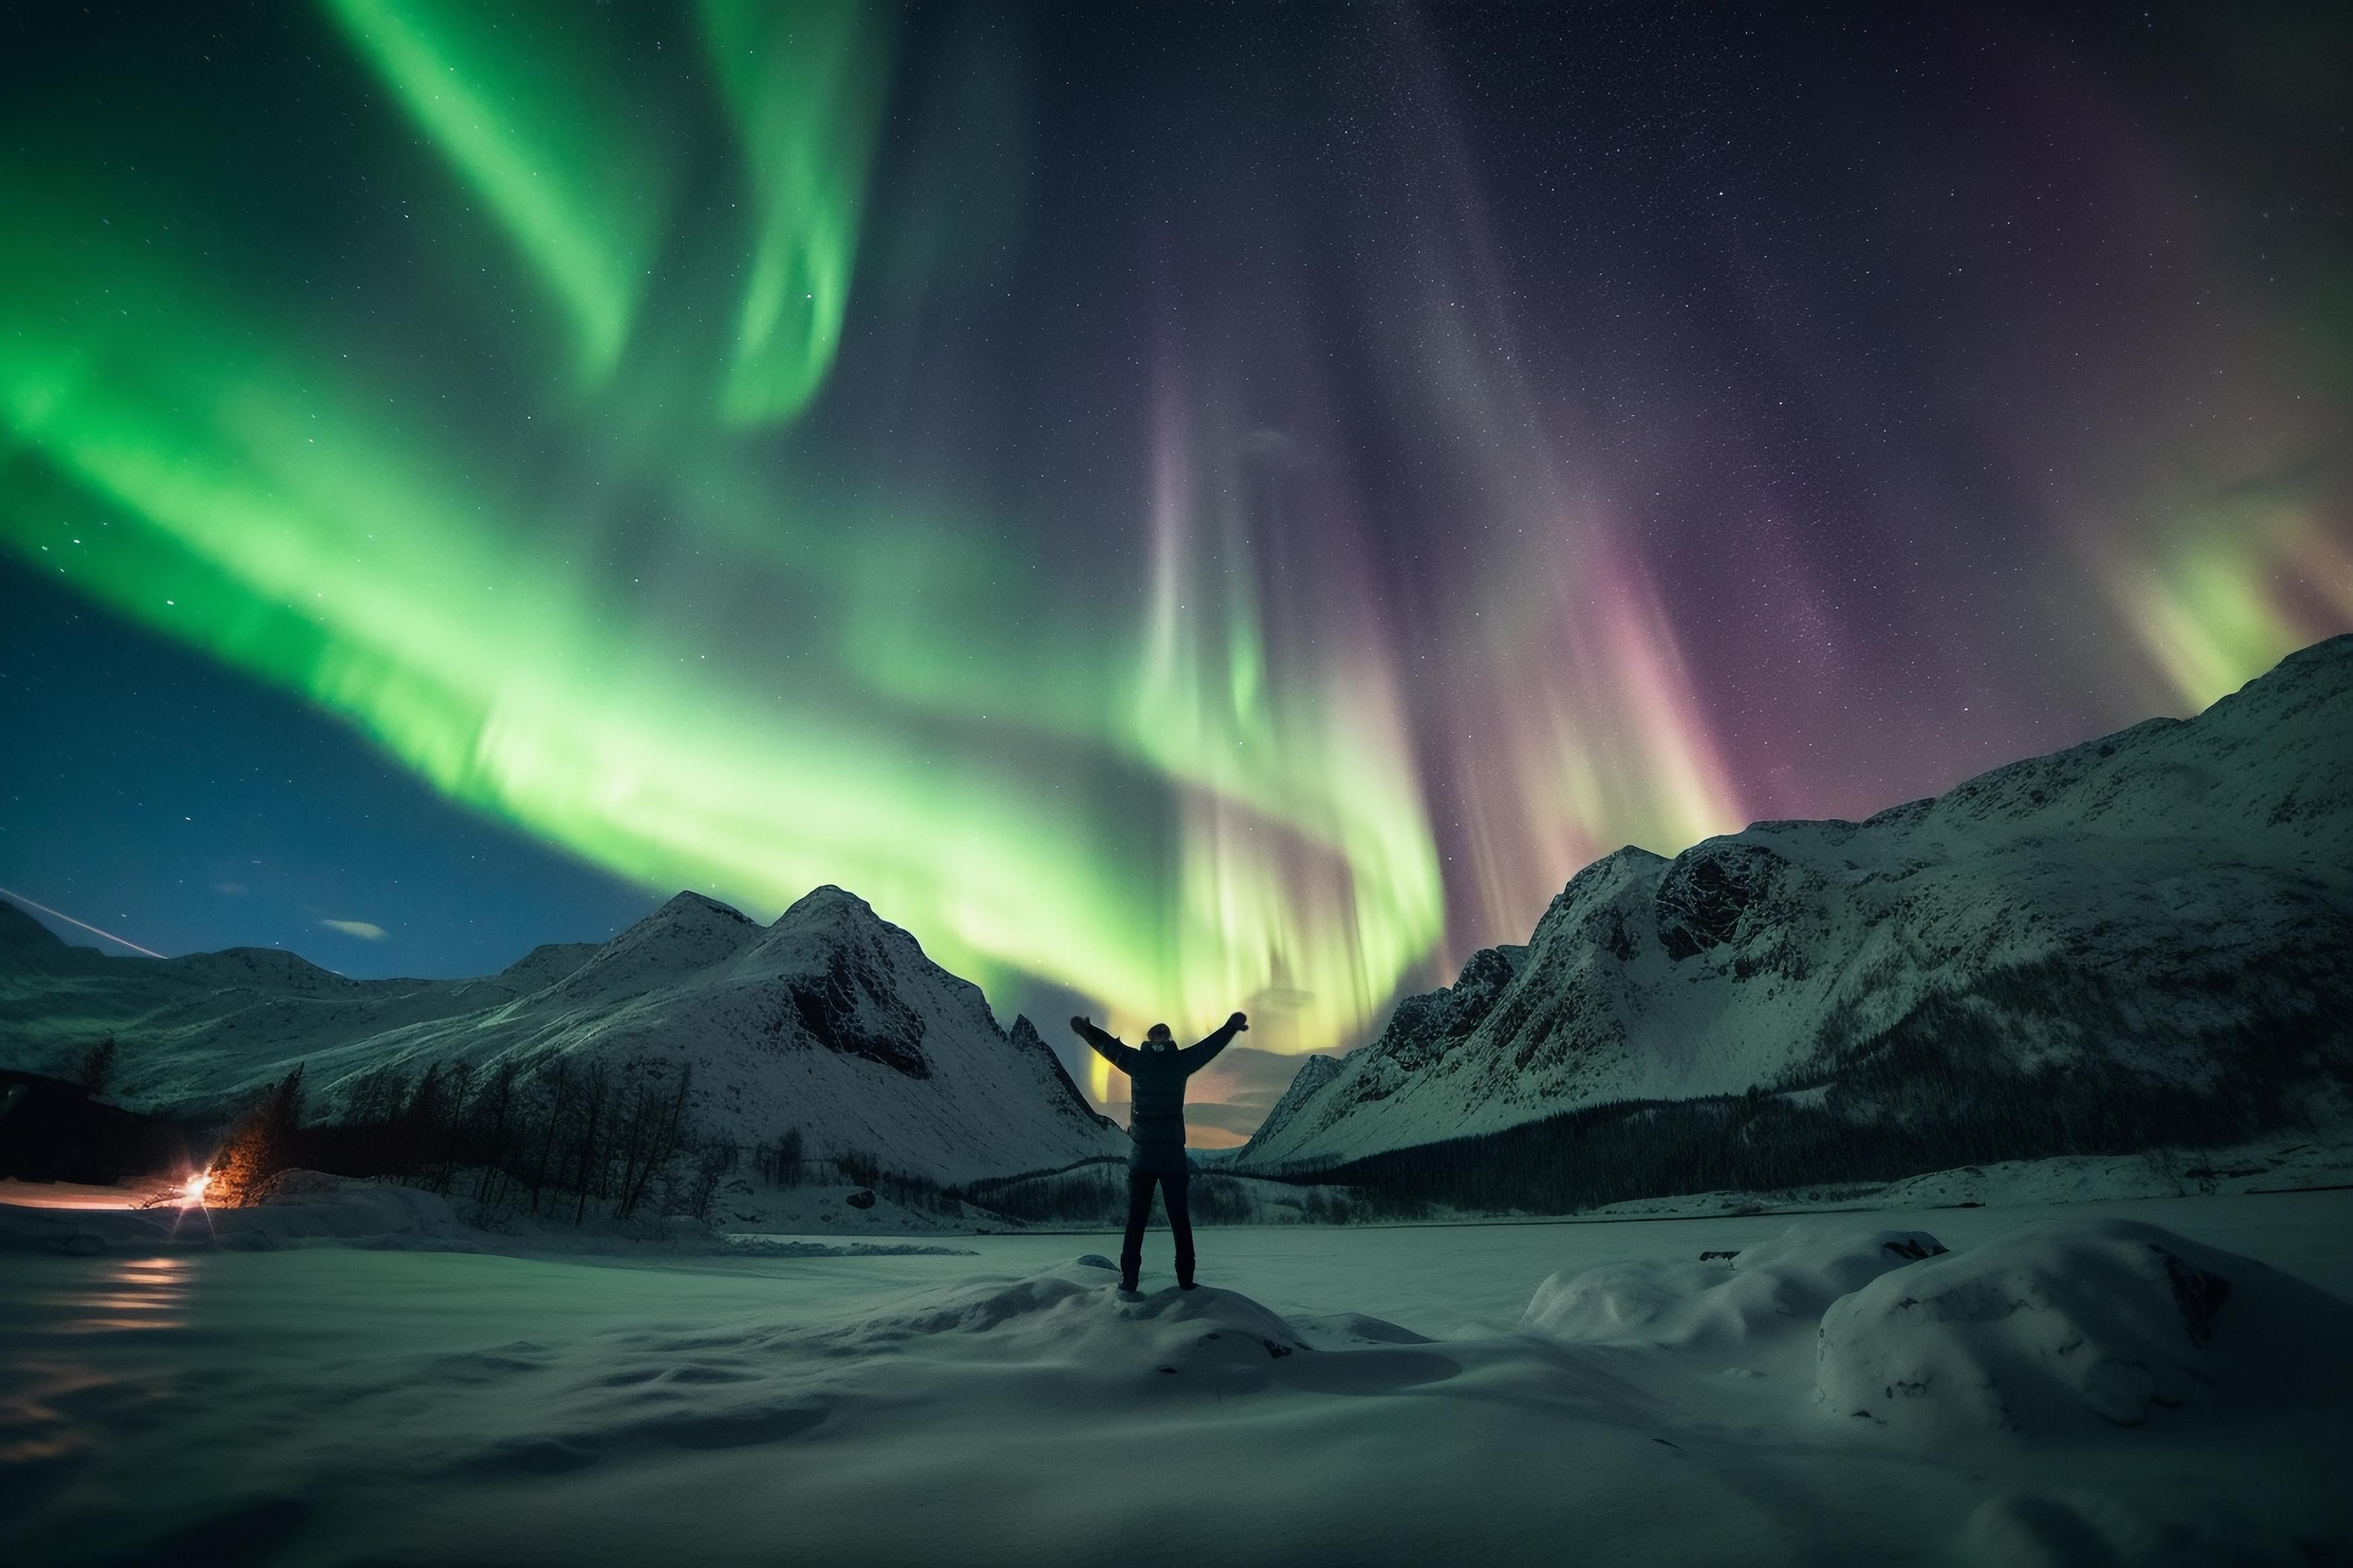 Witnessing the Northern Lights